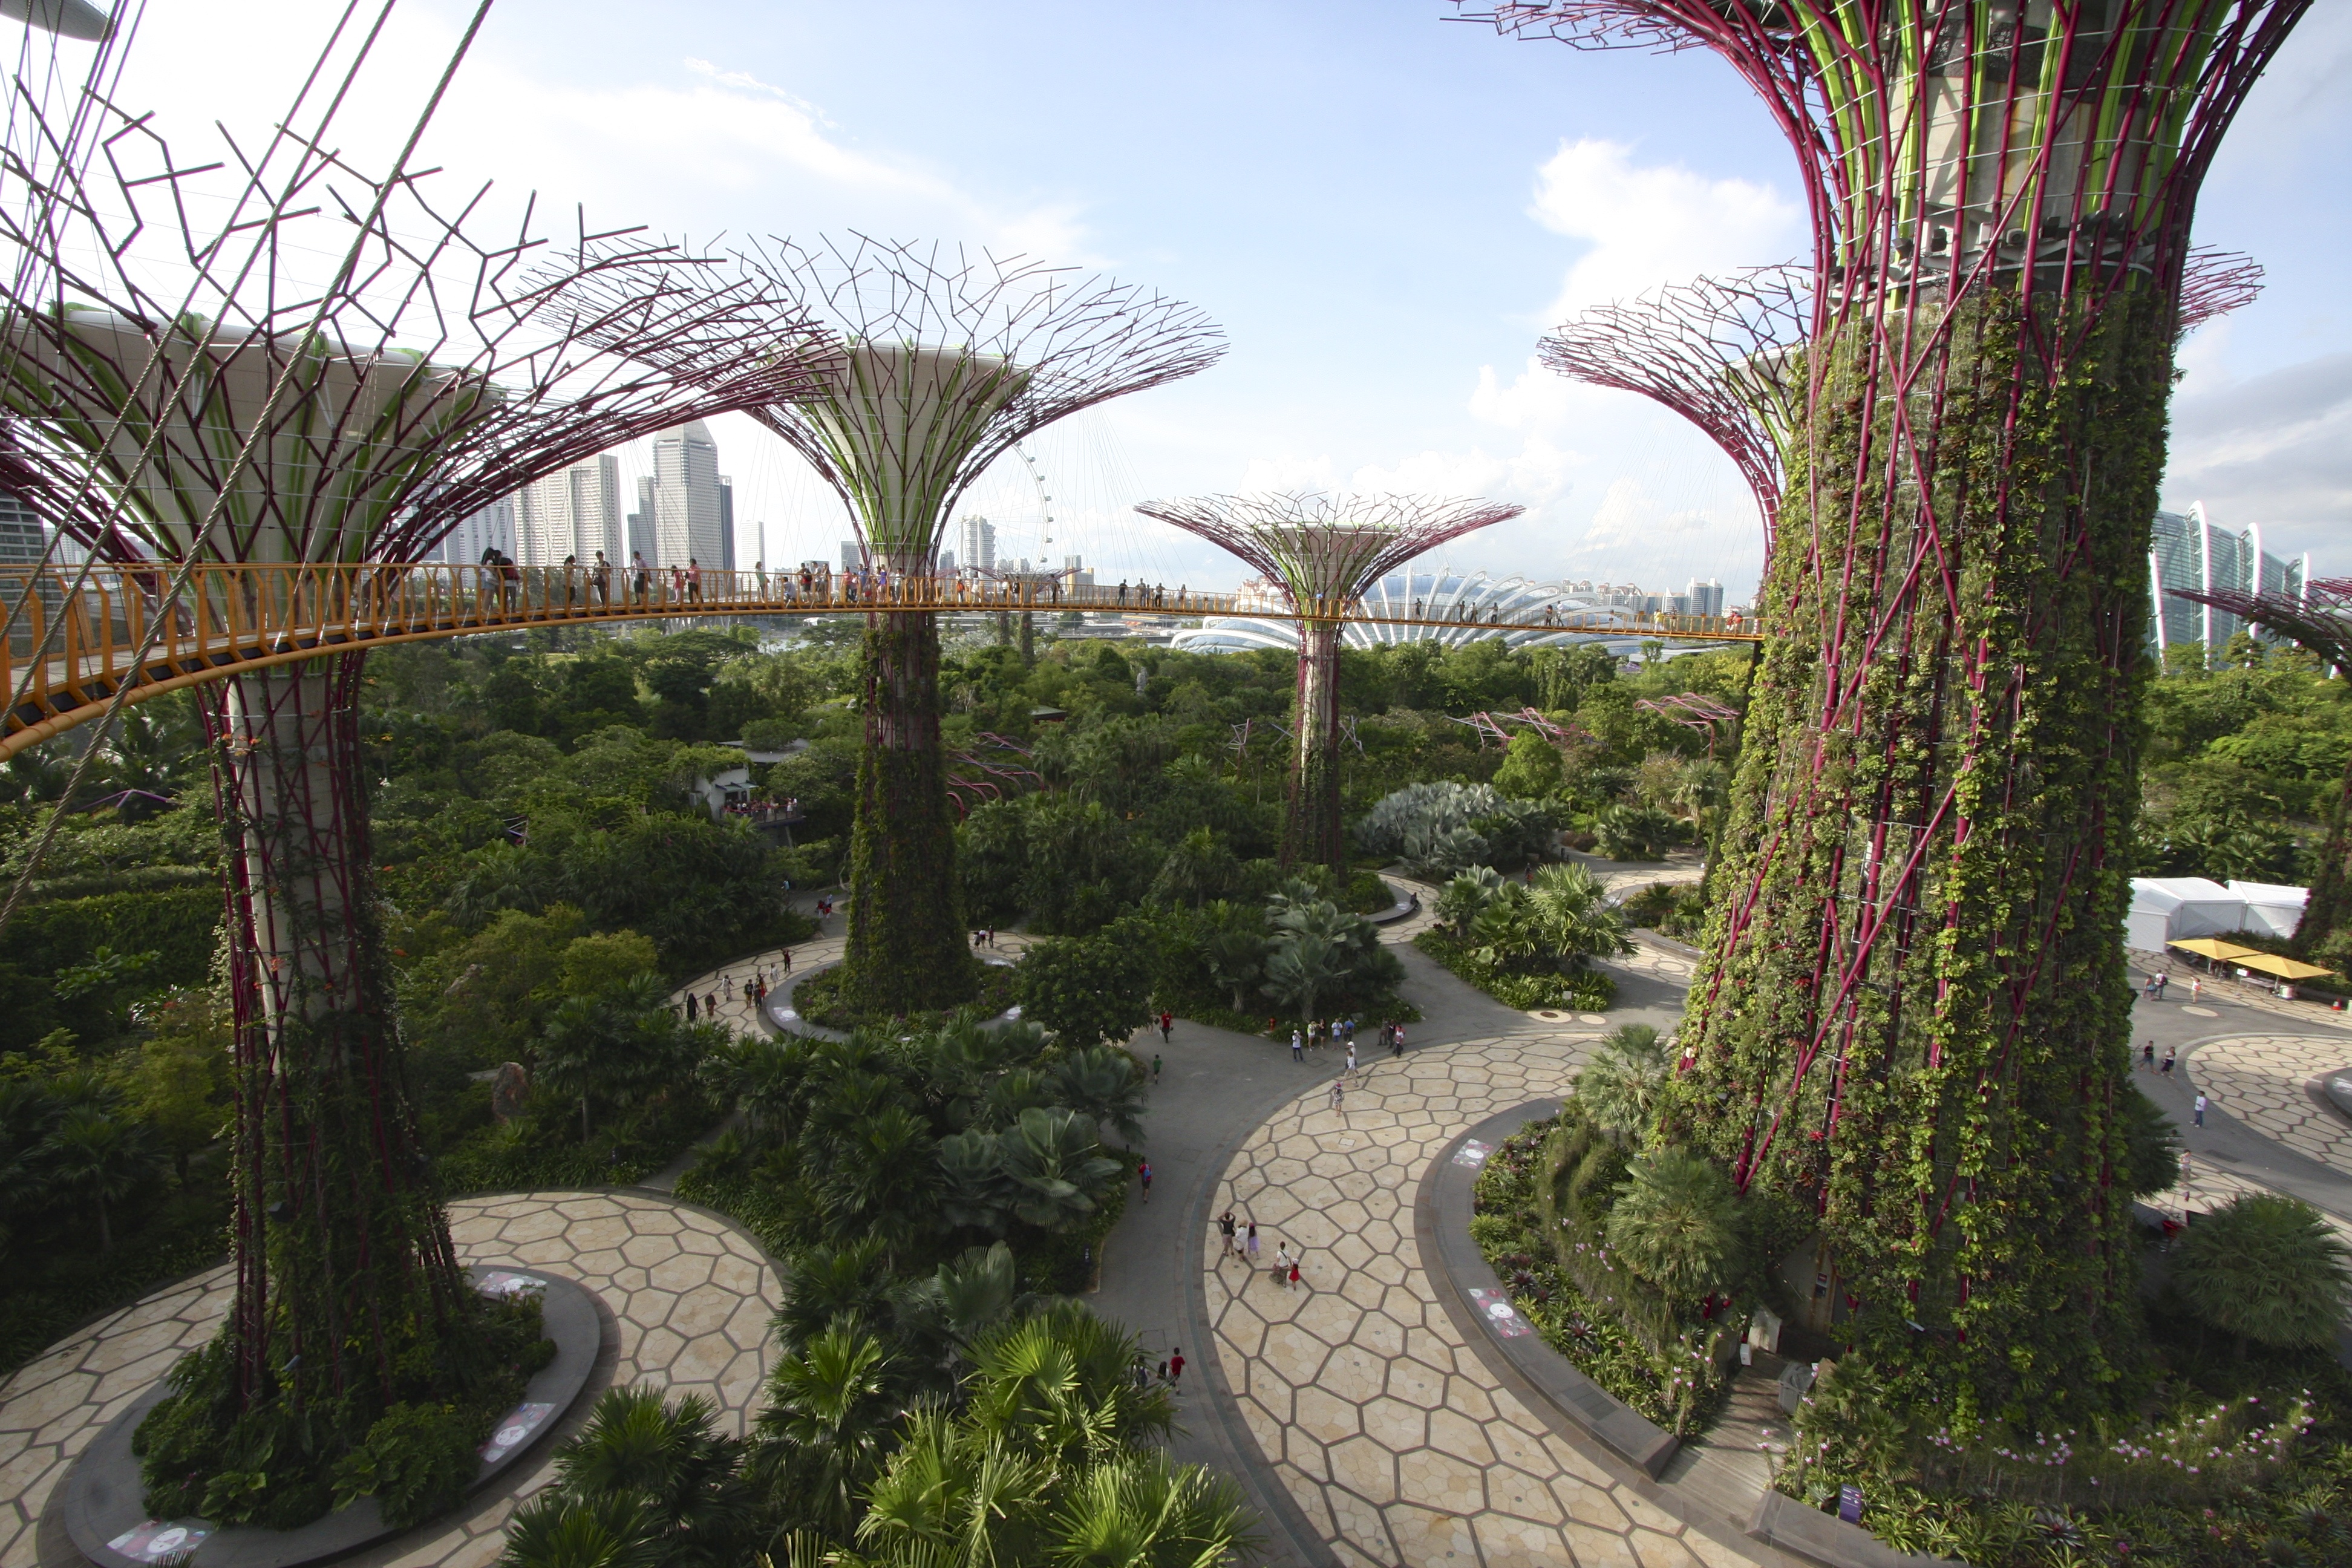 OCBC Skyway Gardens By The Bay Singapore 20140809 3